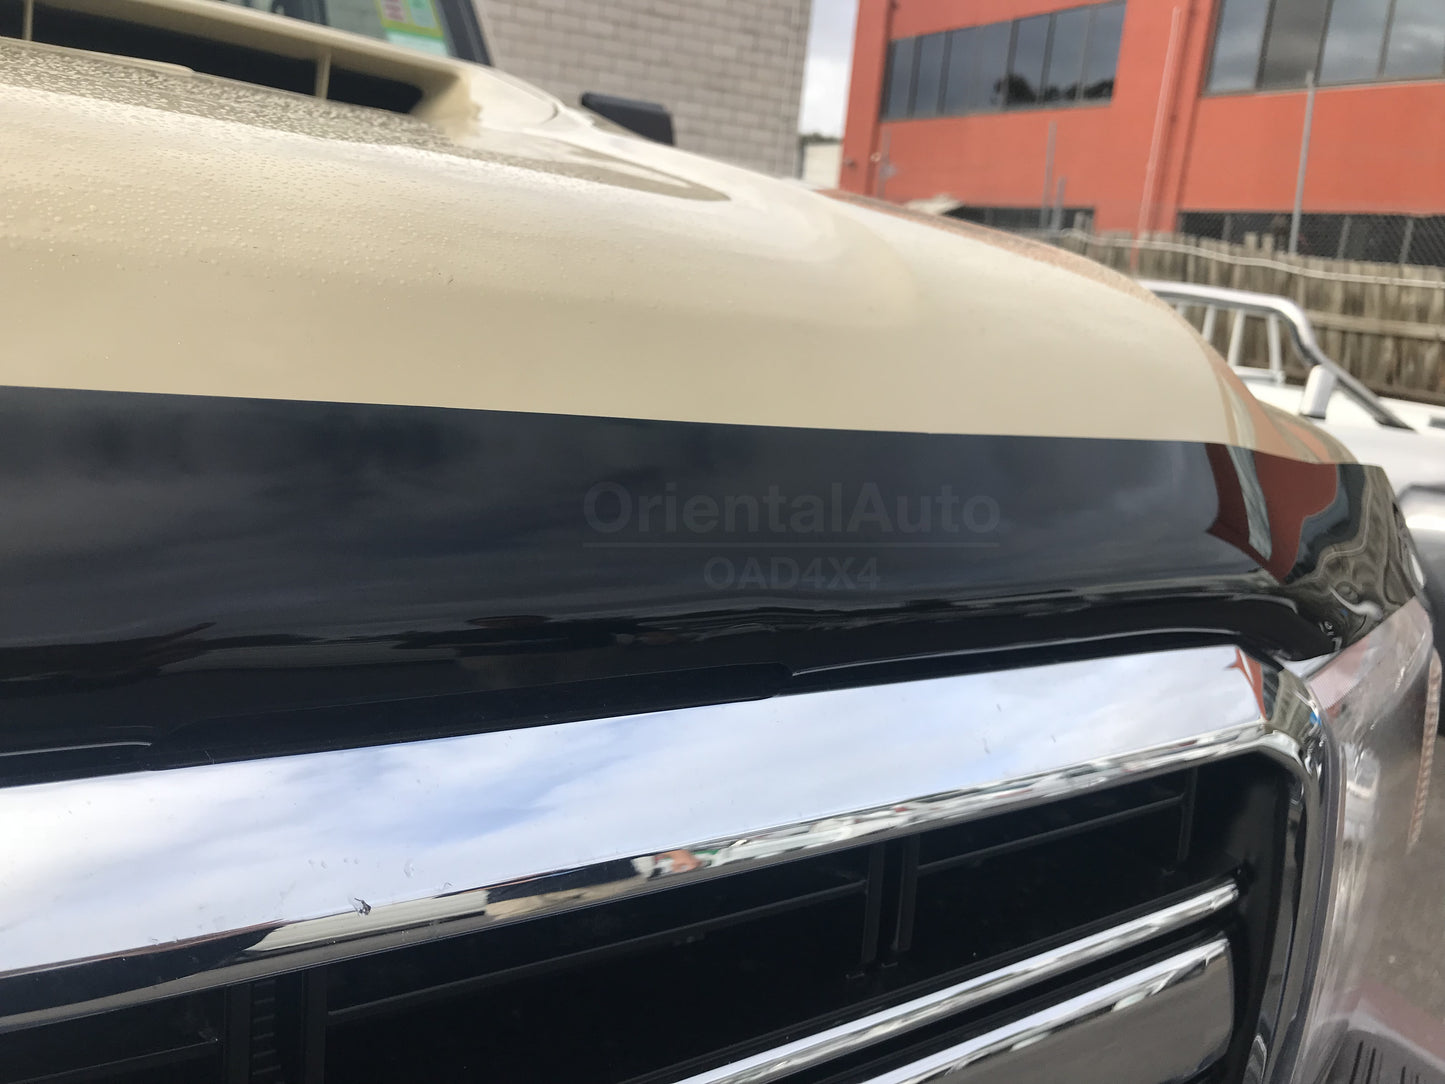 OAD Bonnet Protector & Luxury Weathershields Weather Shields Window Visor for Toyota Landcruiser Land cruiser 70 76 78 79 LC70 LC76 LC78 LC79 2007-2016